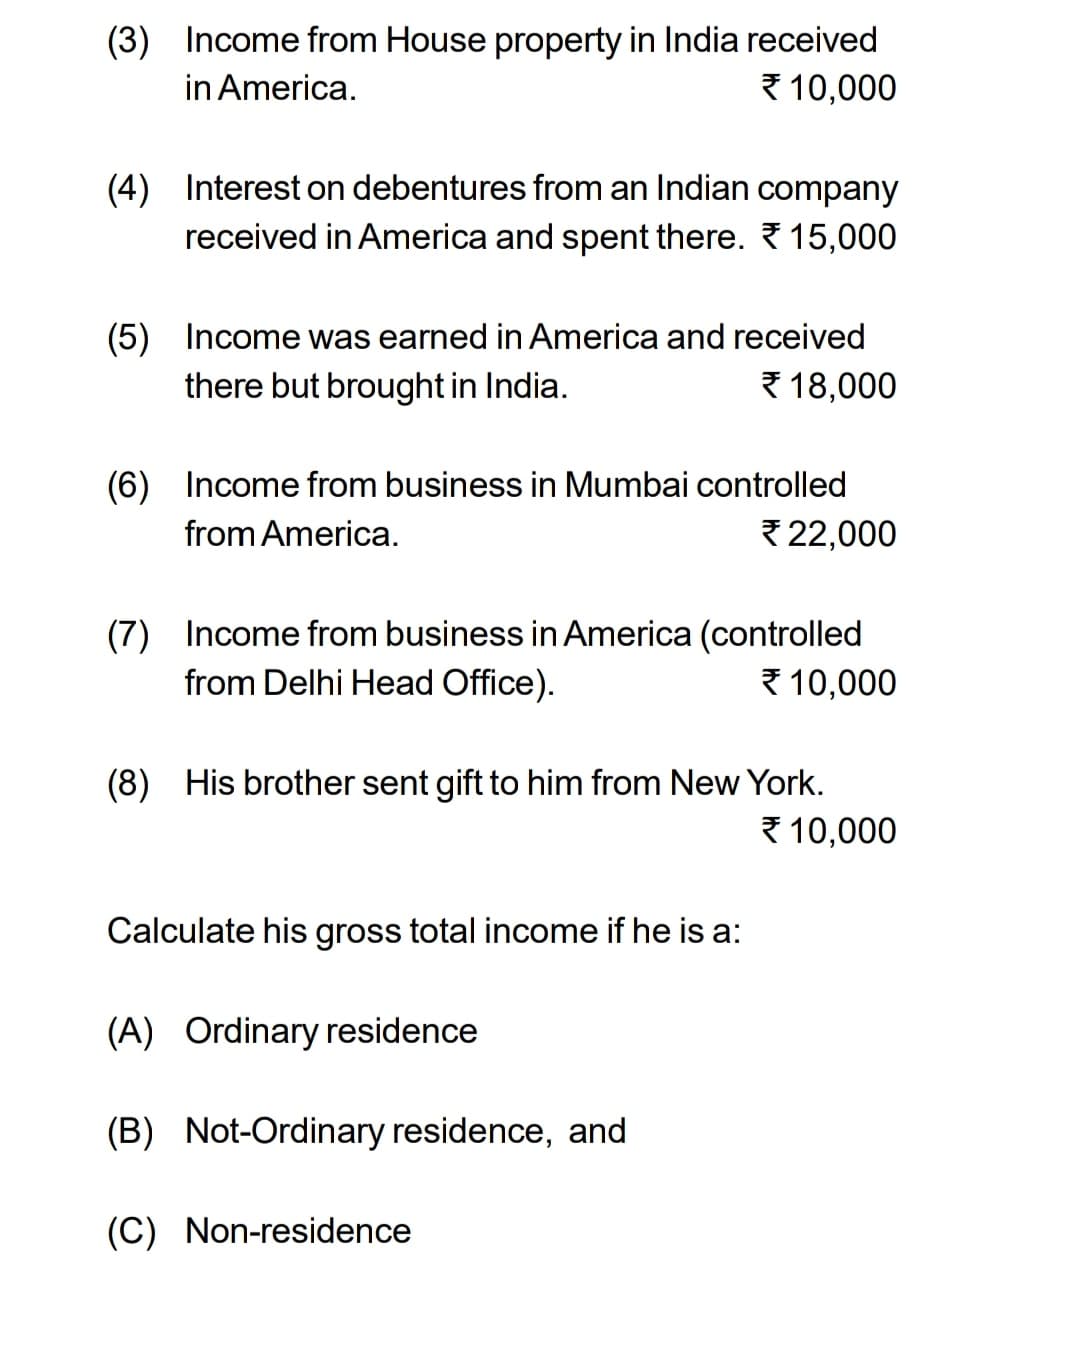 (3) Income from House property in India received
in America.
10,000
(4) Interest on debentures from an Indian company
received in America and spent there. 15,000
(5) Income was earned in America and received
there but brought in India.
18,000
(6) Income from business in Mumbai controlled
from America.
22,000
(7) Income from business in America (controlled
from Delhi Head Office).
10,000
(8) His brother sent gift to him from New York.
10,000
Calculate his gross total income if he is a:
(A) Ordinary residence
(B) Not-Ordinary residence, and
(C) Non-residence
